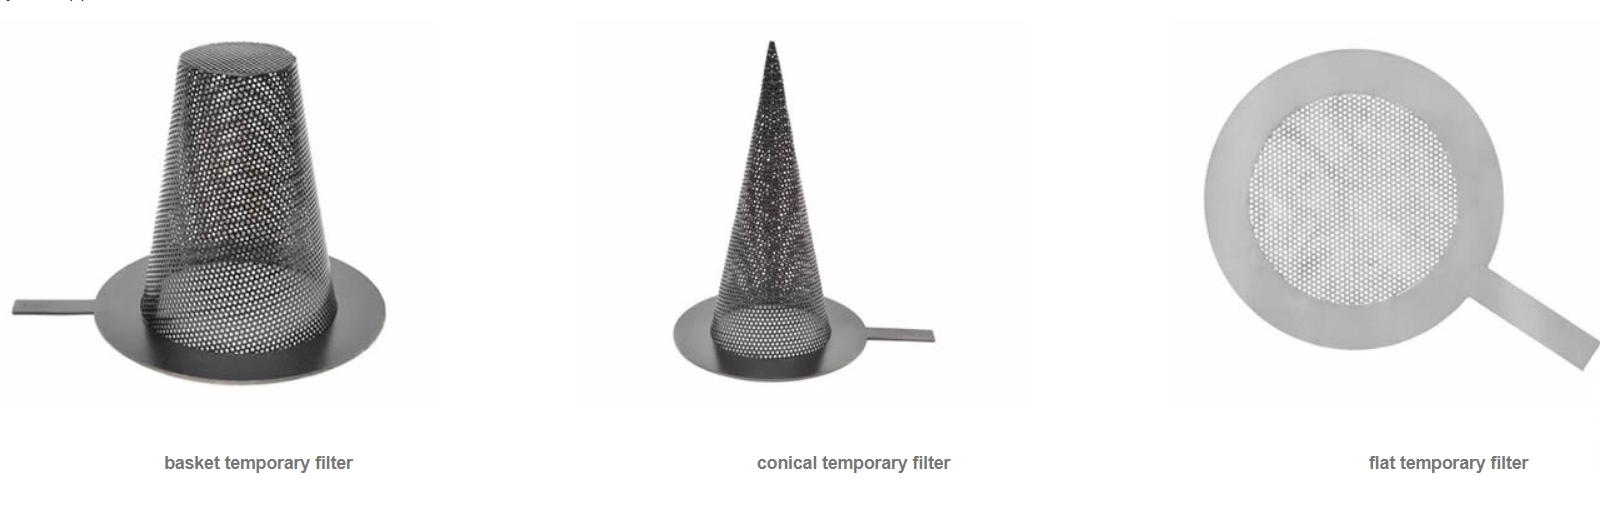 Temporary Strainers types